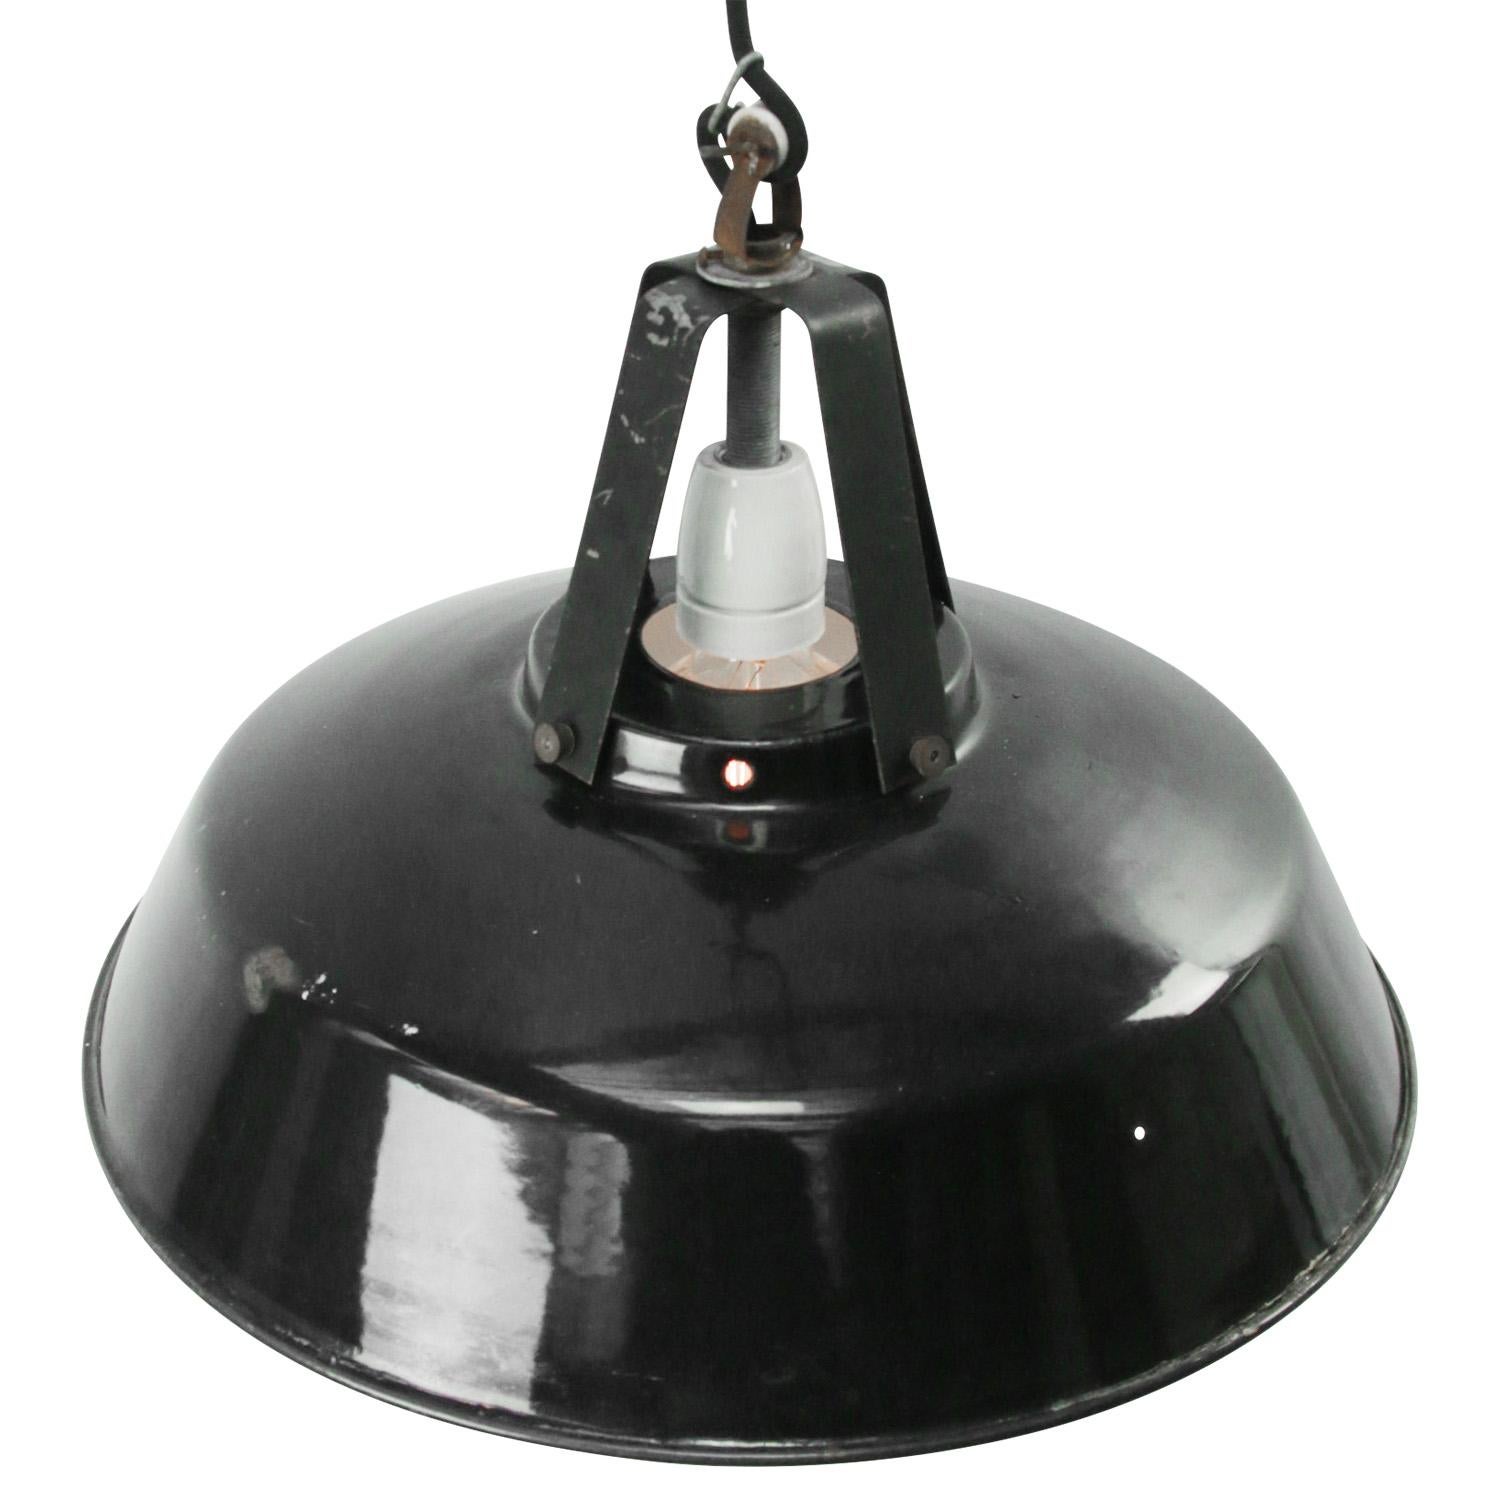 French factory light.
Black iron top with enamel shade.
White inside.

Weight: 1.60 kg / 3.5 lb

Priced per individual item. All lamps have been made suitable by international standards for incandescent light bulbs, energy-efficient and LED